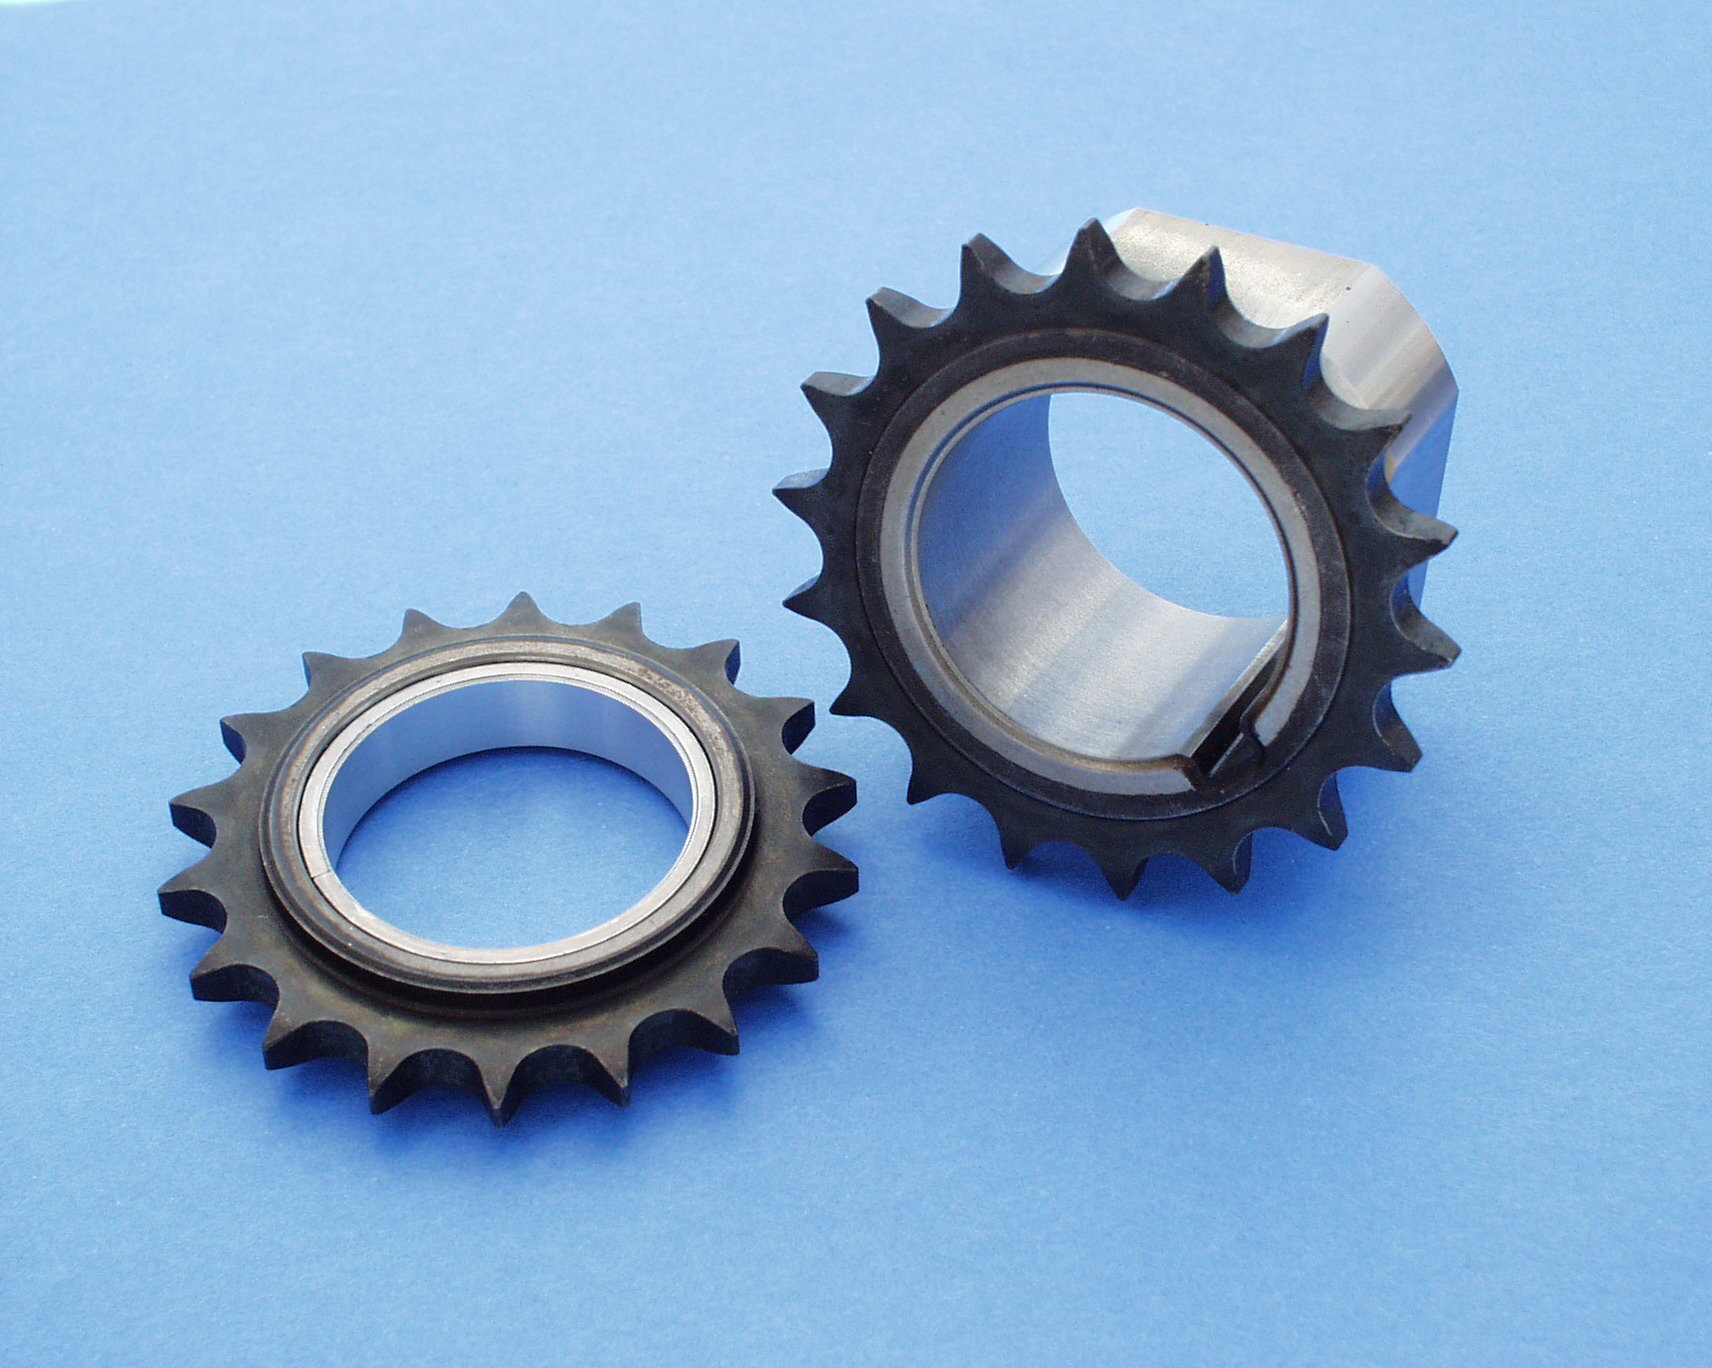 Development of high-strength engine sprocket by warm compaction method with die lubrication